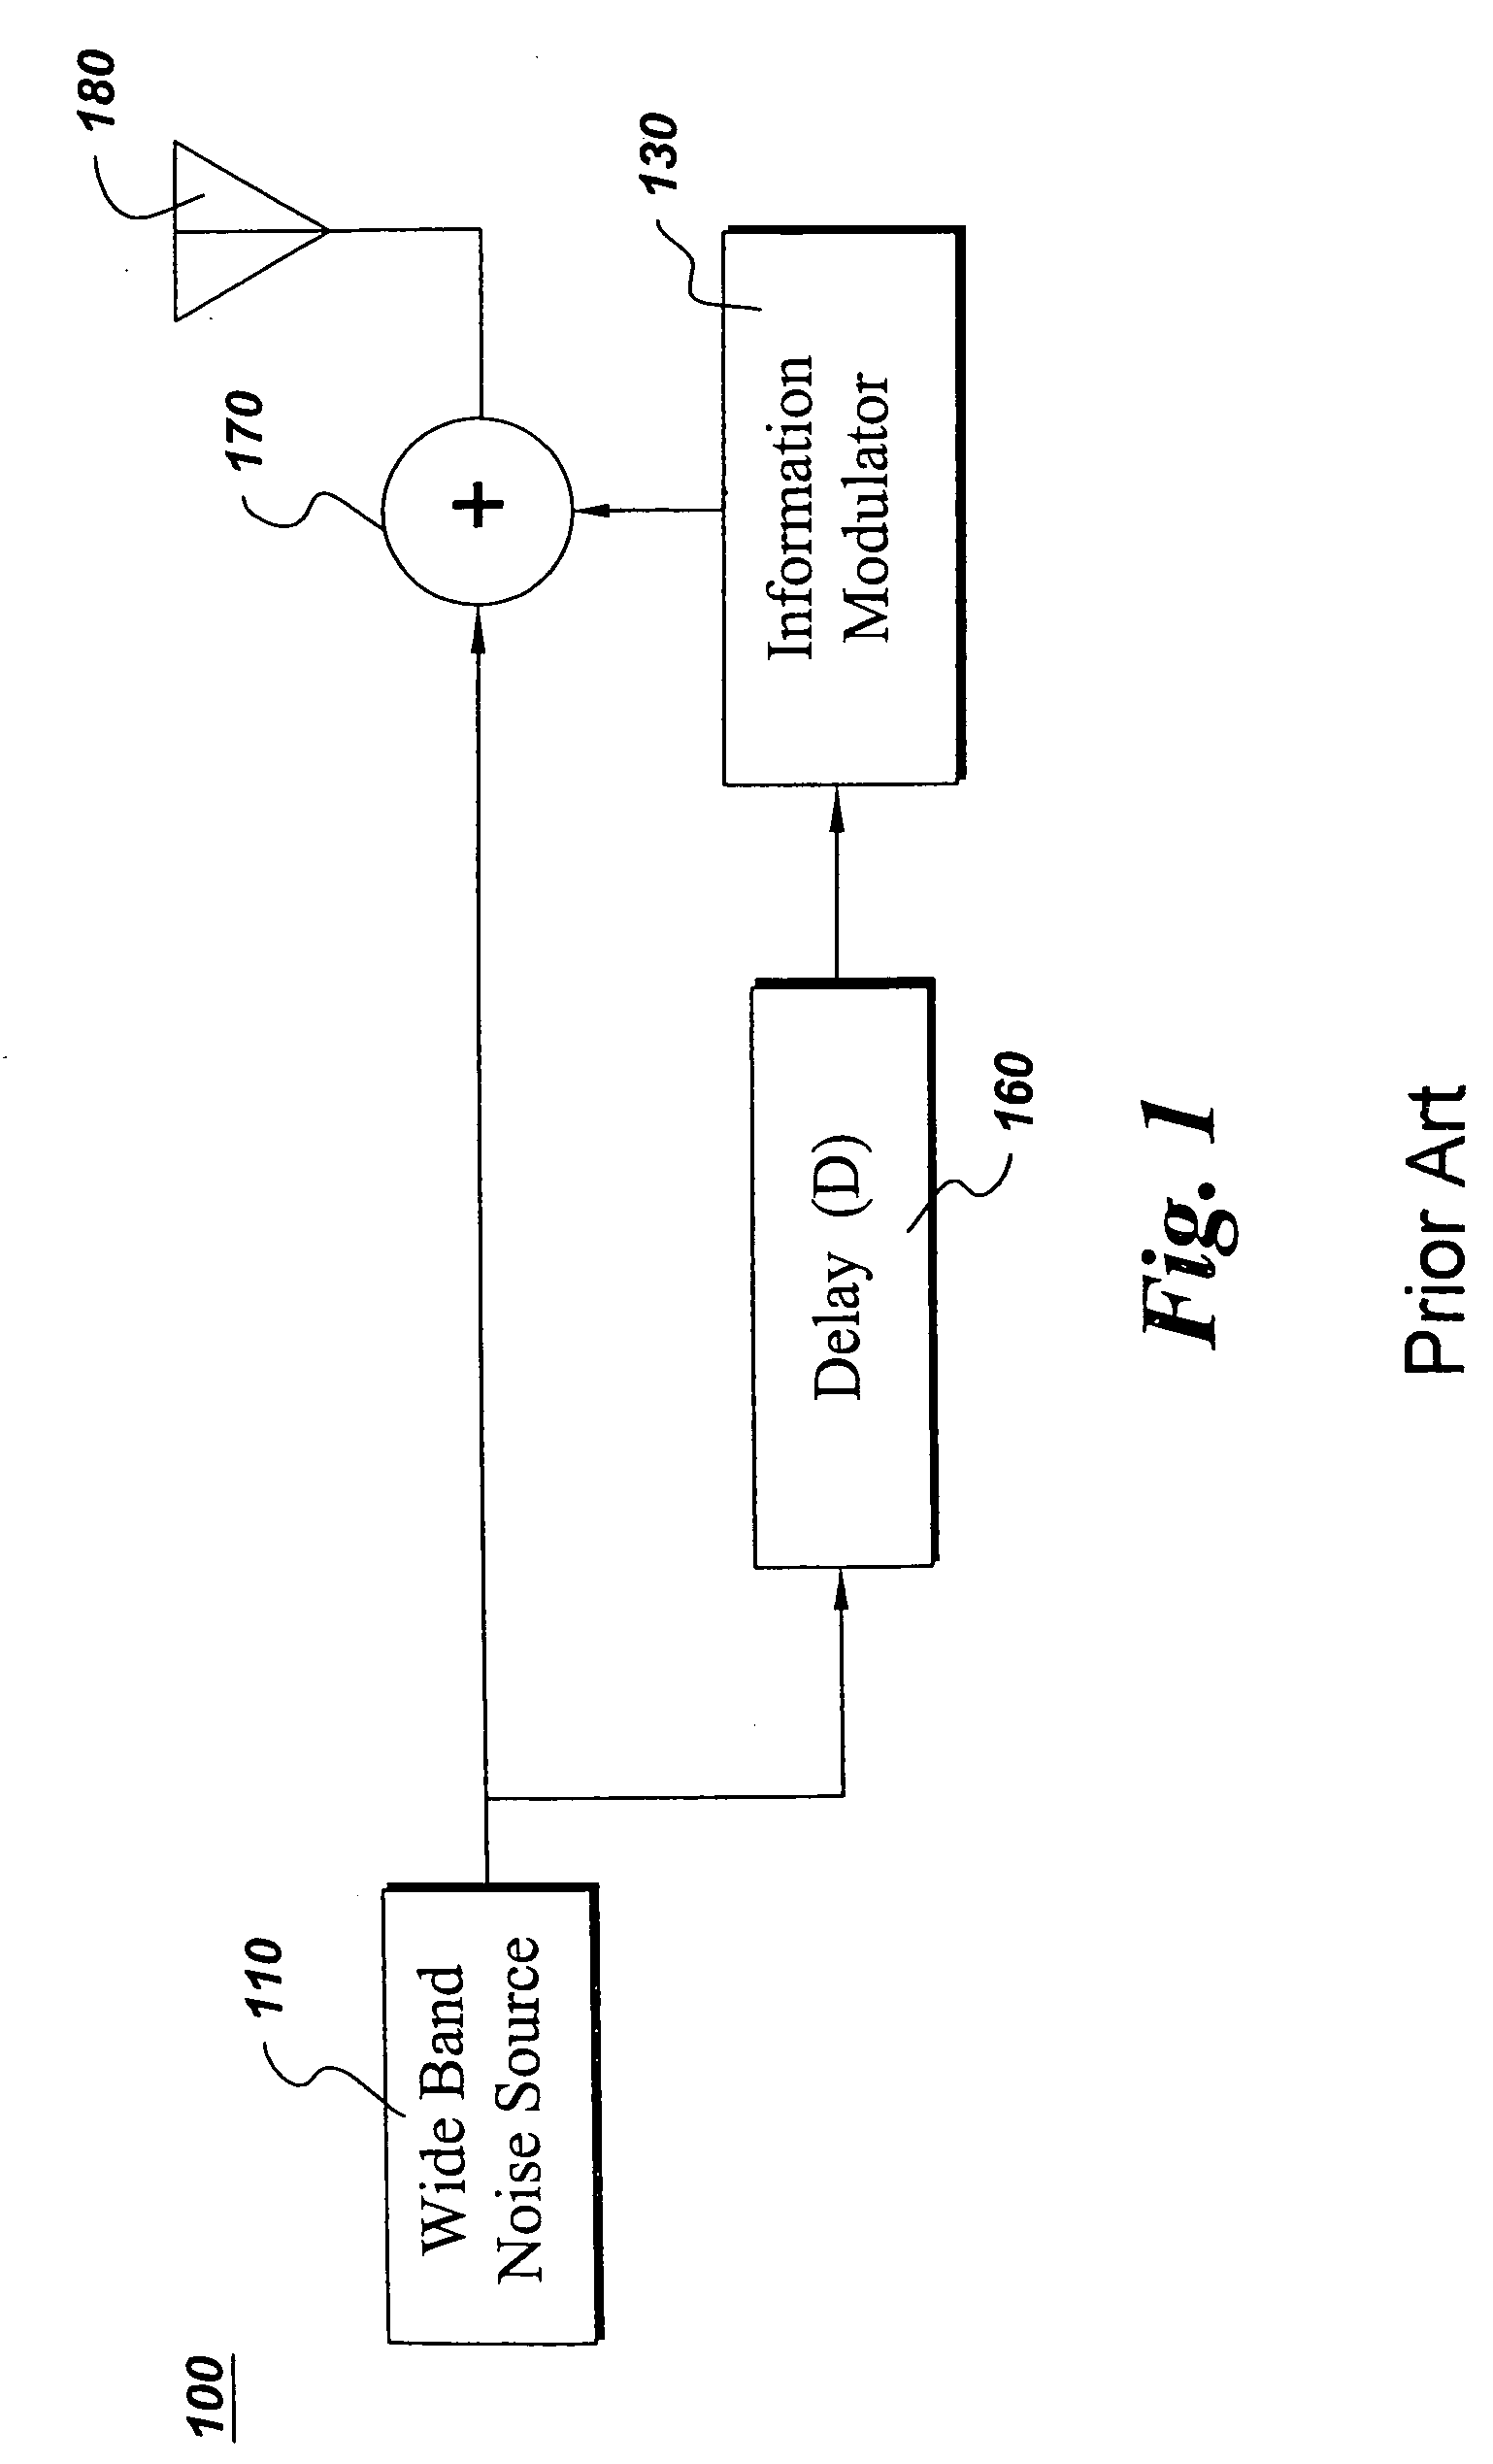 Ultra-wideband communications system and method using a delay hopped, continuous noise transmitted reference